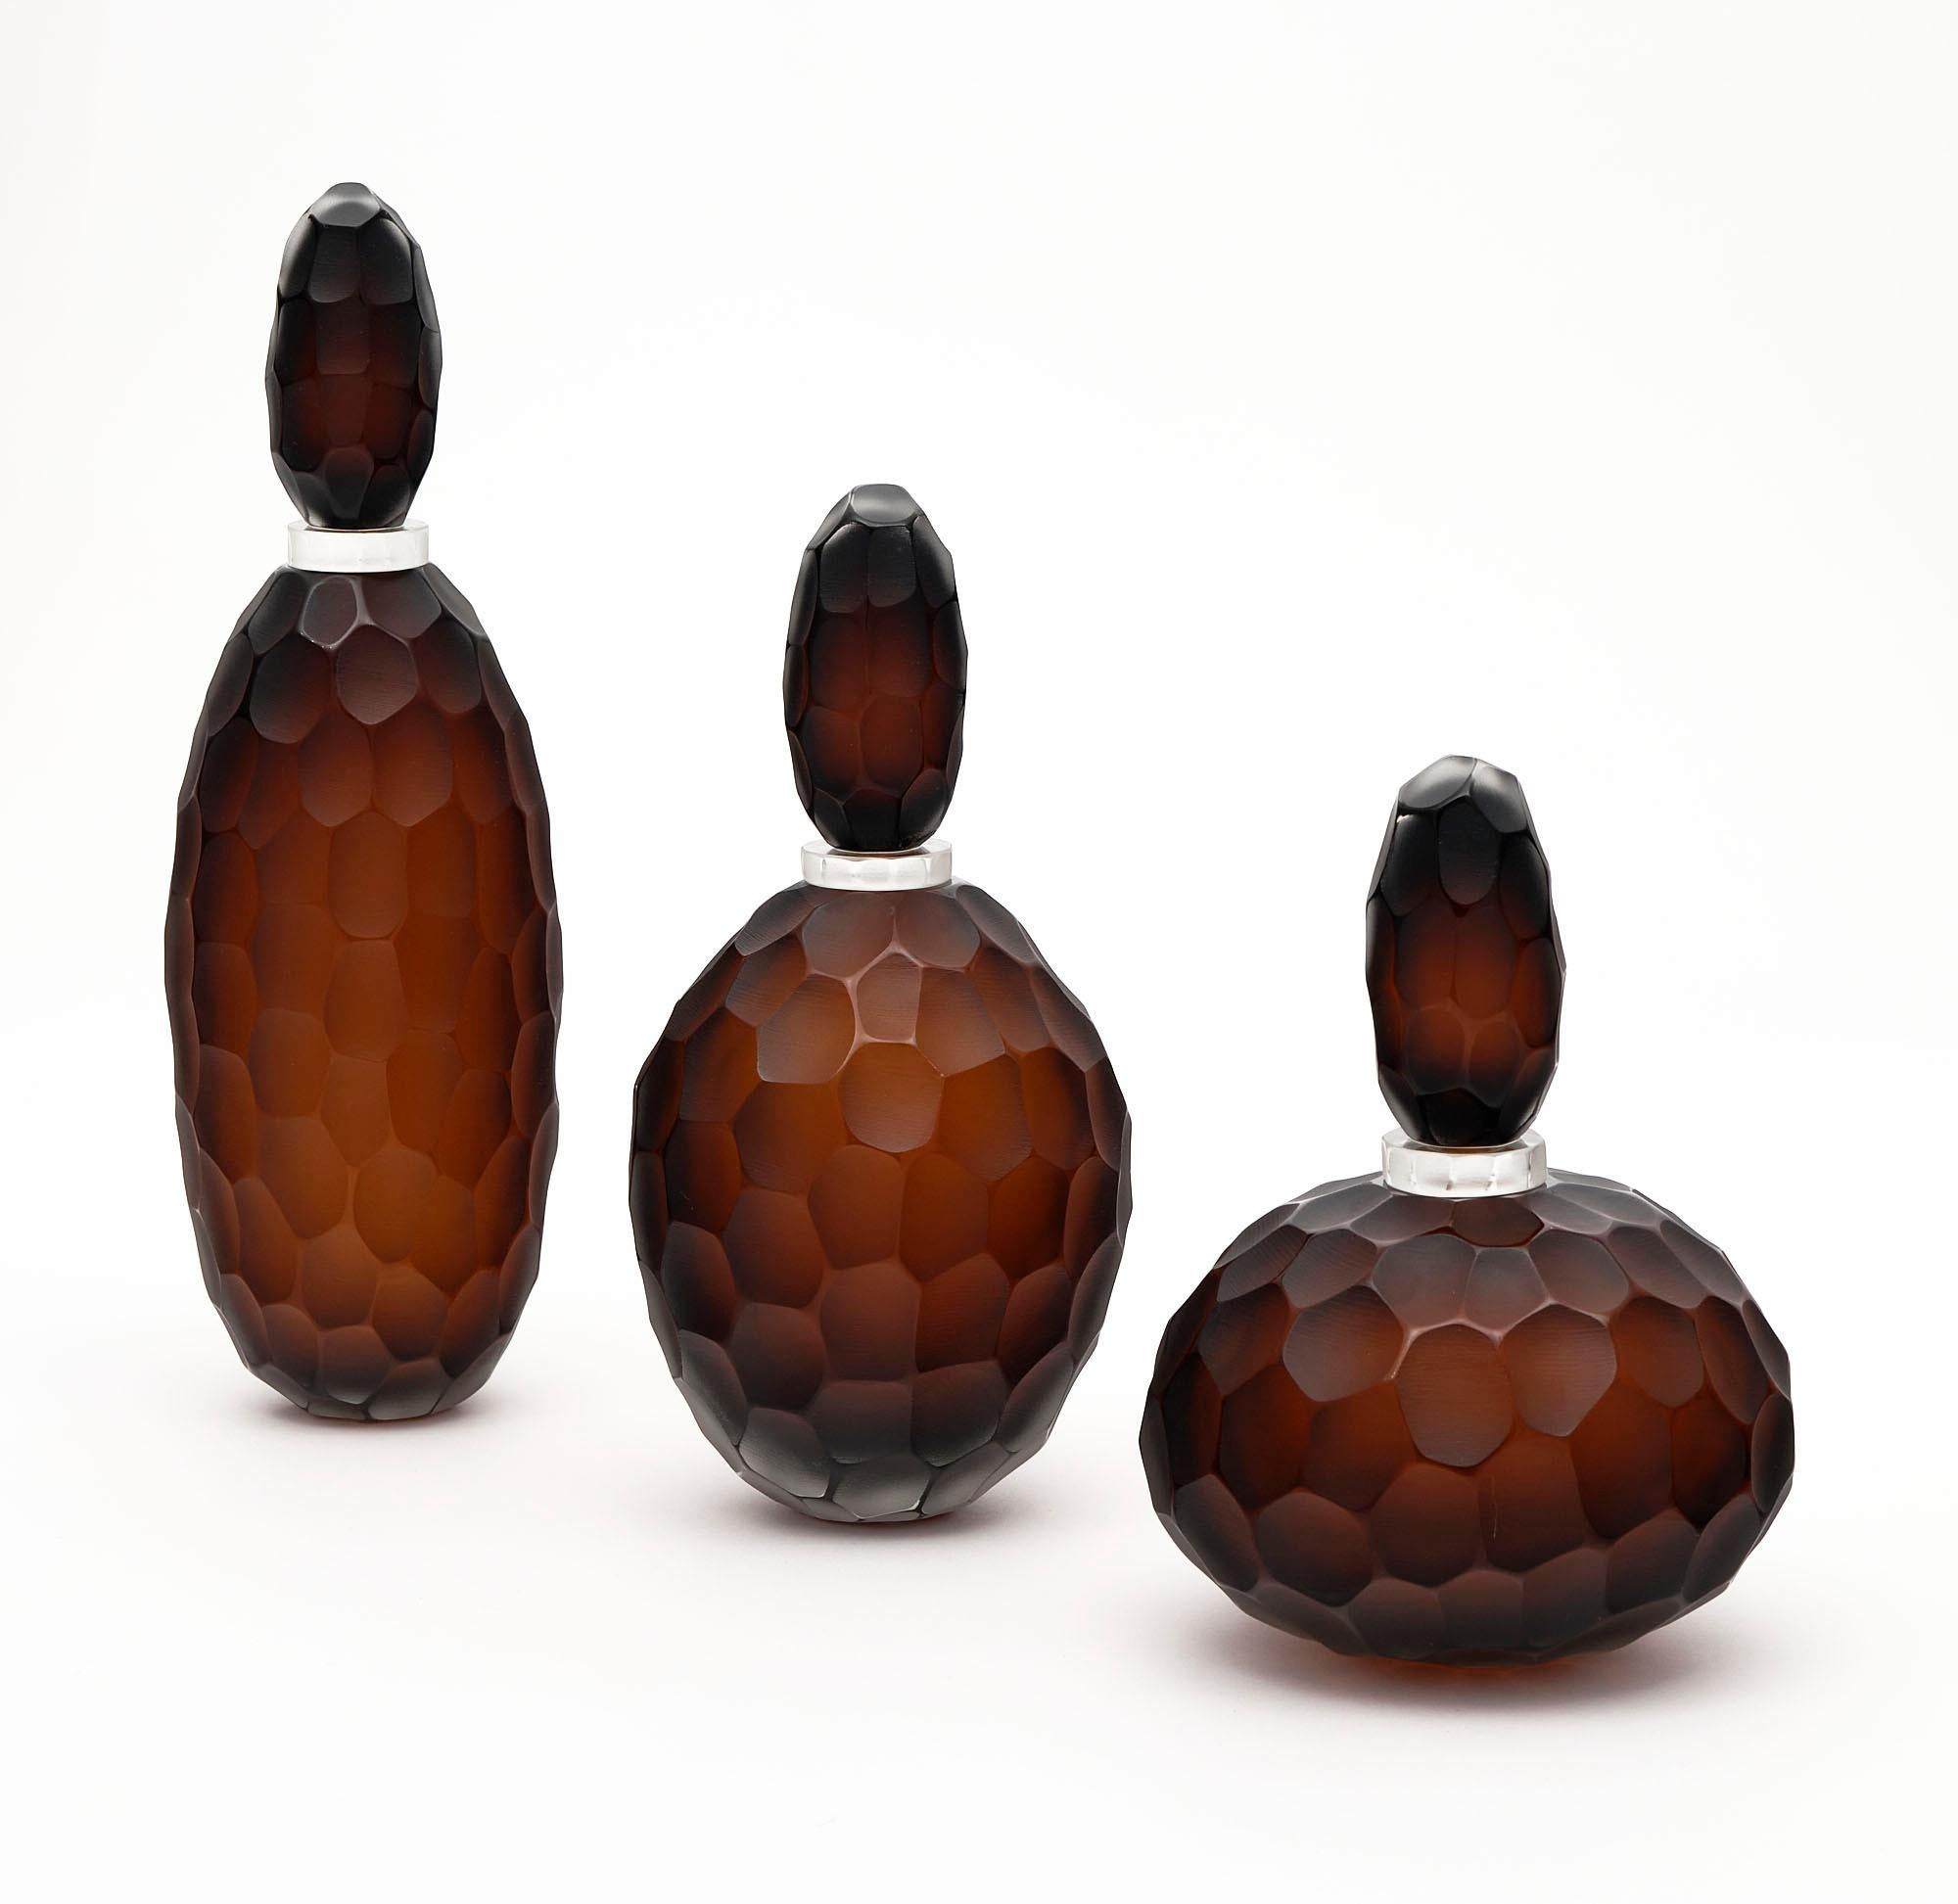 Murano glass “ferro battuto” bottles. This beautiful trio is hand-blown using this hammered technique in the manner of Carlo Scarpa. We love the striking color and depth to these works of art. They are signed by glass maestro Alberto Dona.

The